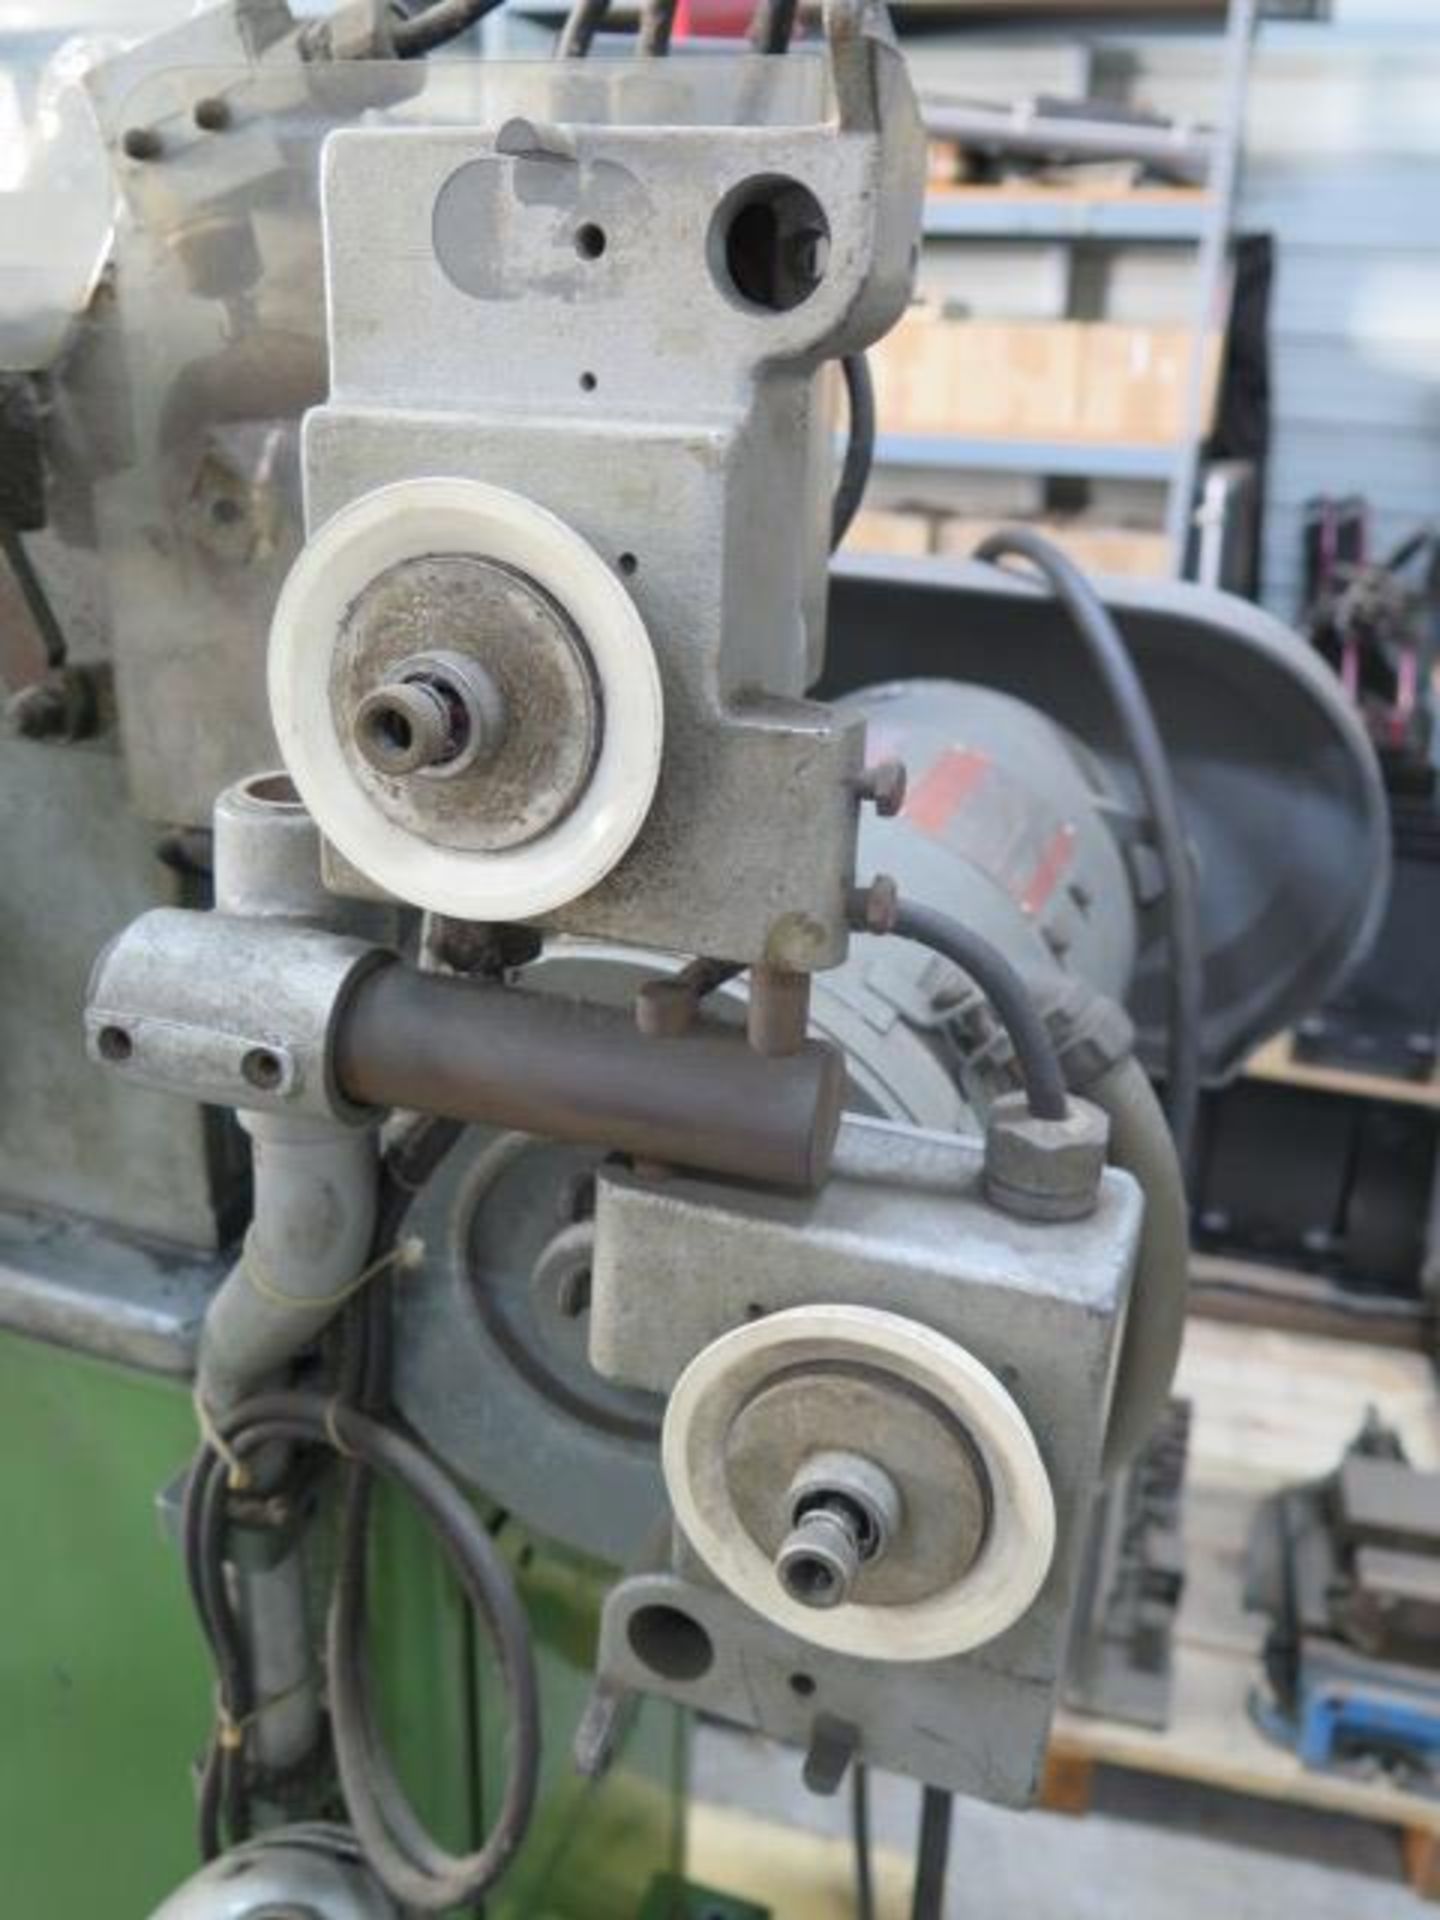 Bachi mdl. 120 Coil Winder s/n 262 (SOLD AS-IS - NO WARRANTY) - Image 8 of 12